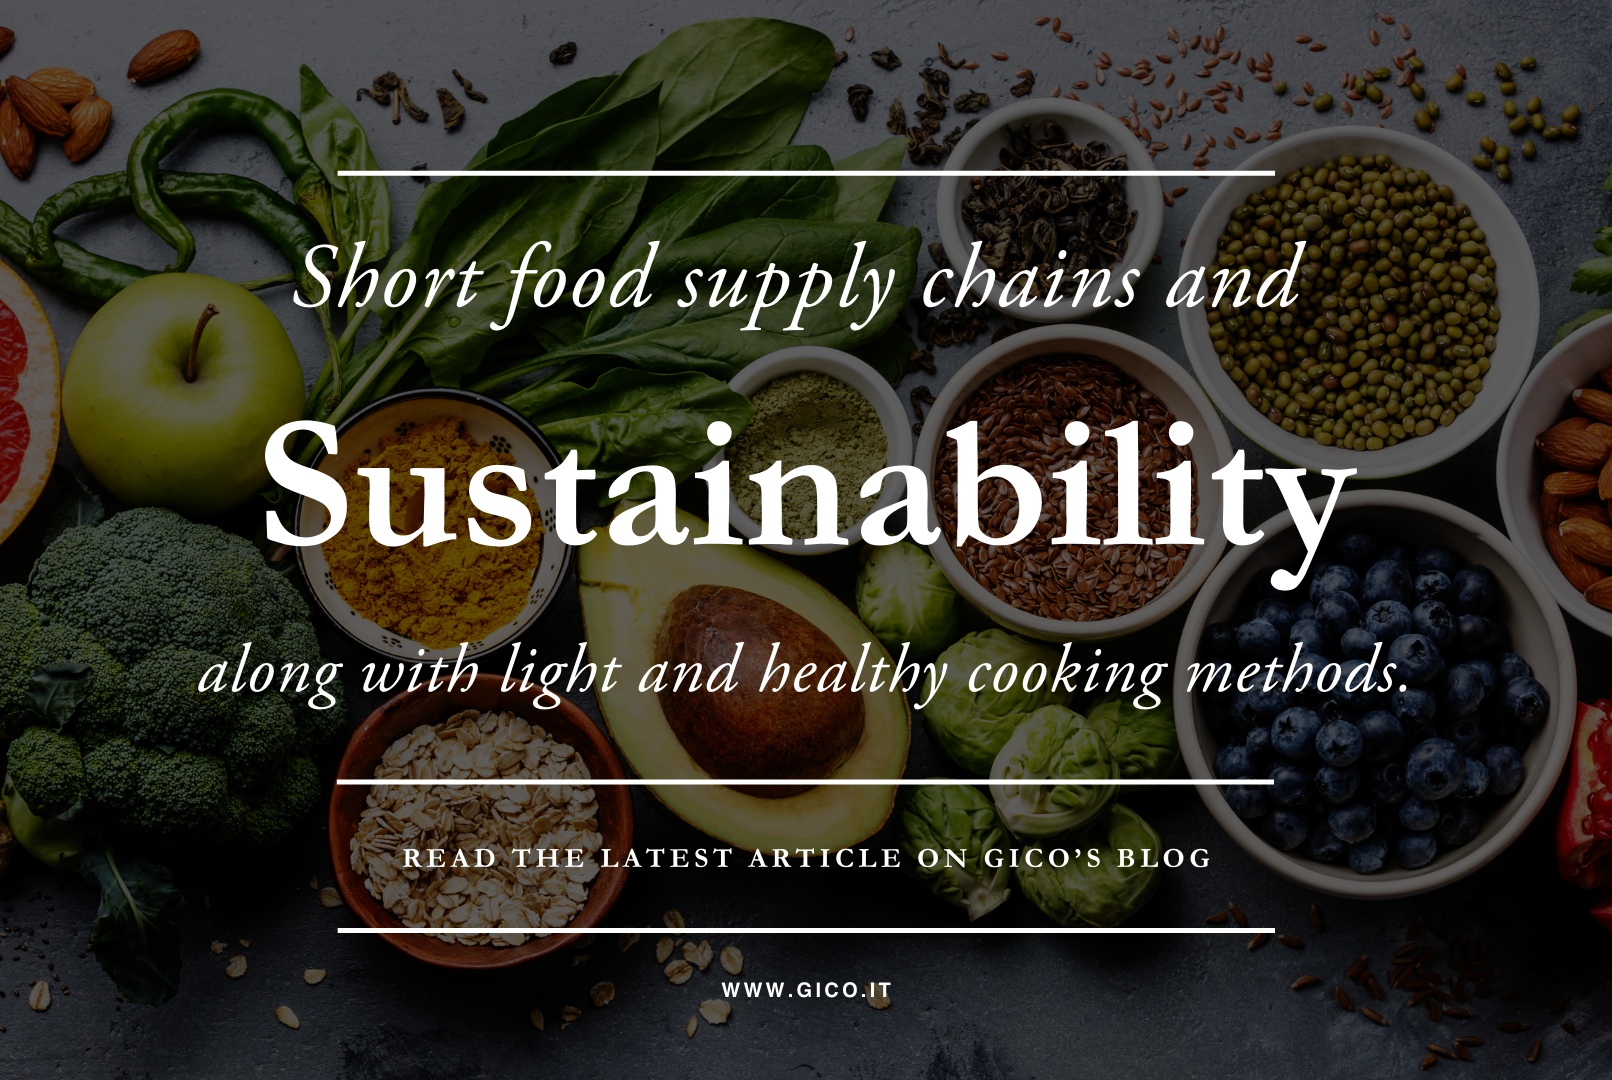 Short food supply chains and sustainability, along with light and healthy cooking methods. </br> GICO serves chefs, addressing present and future needs